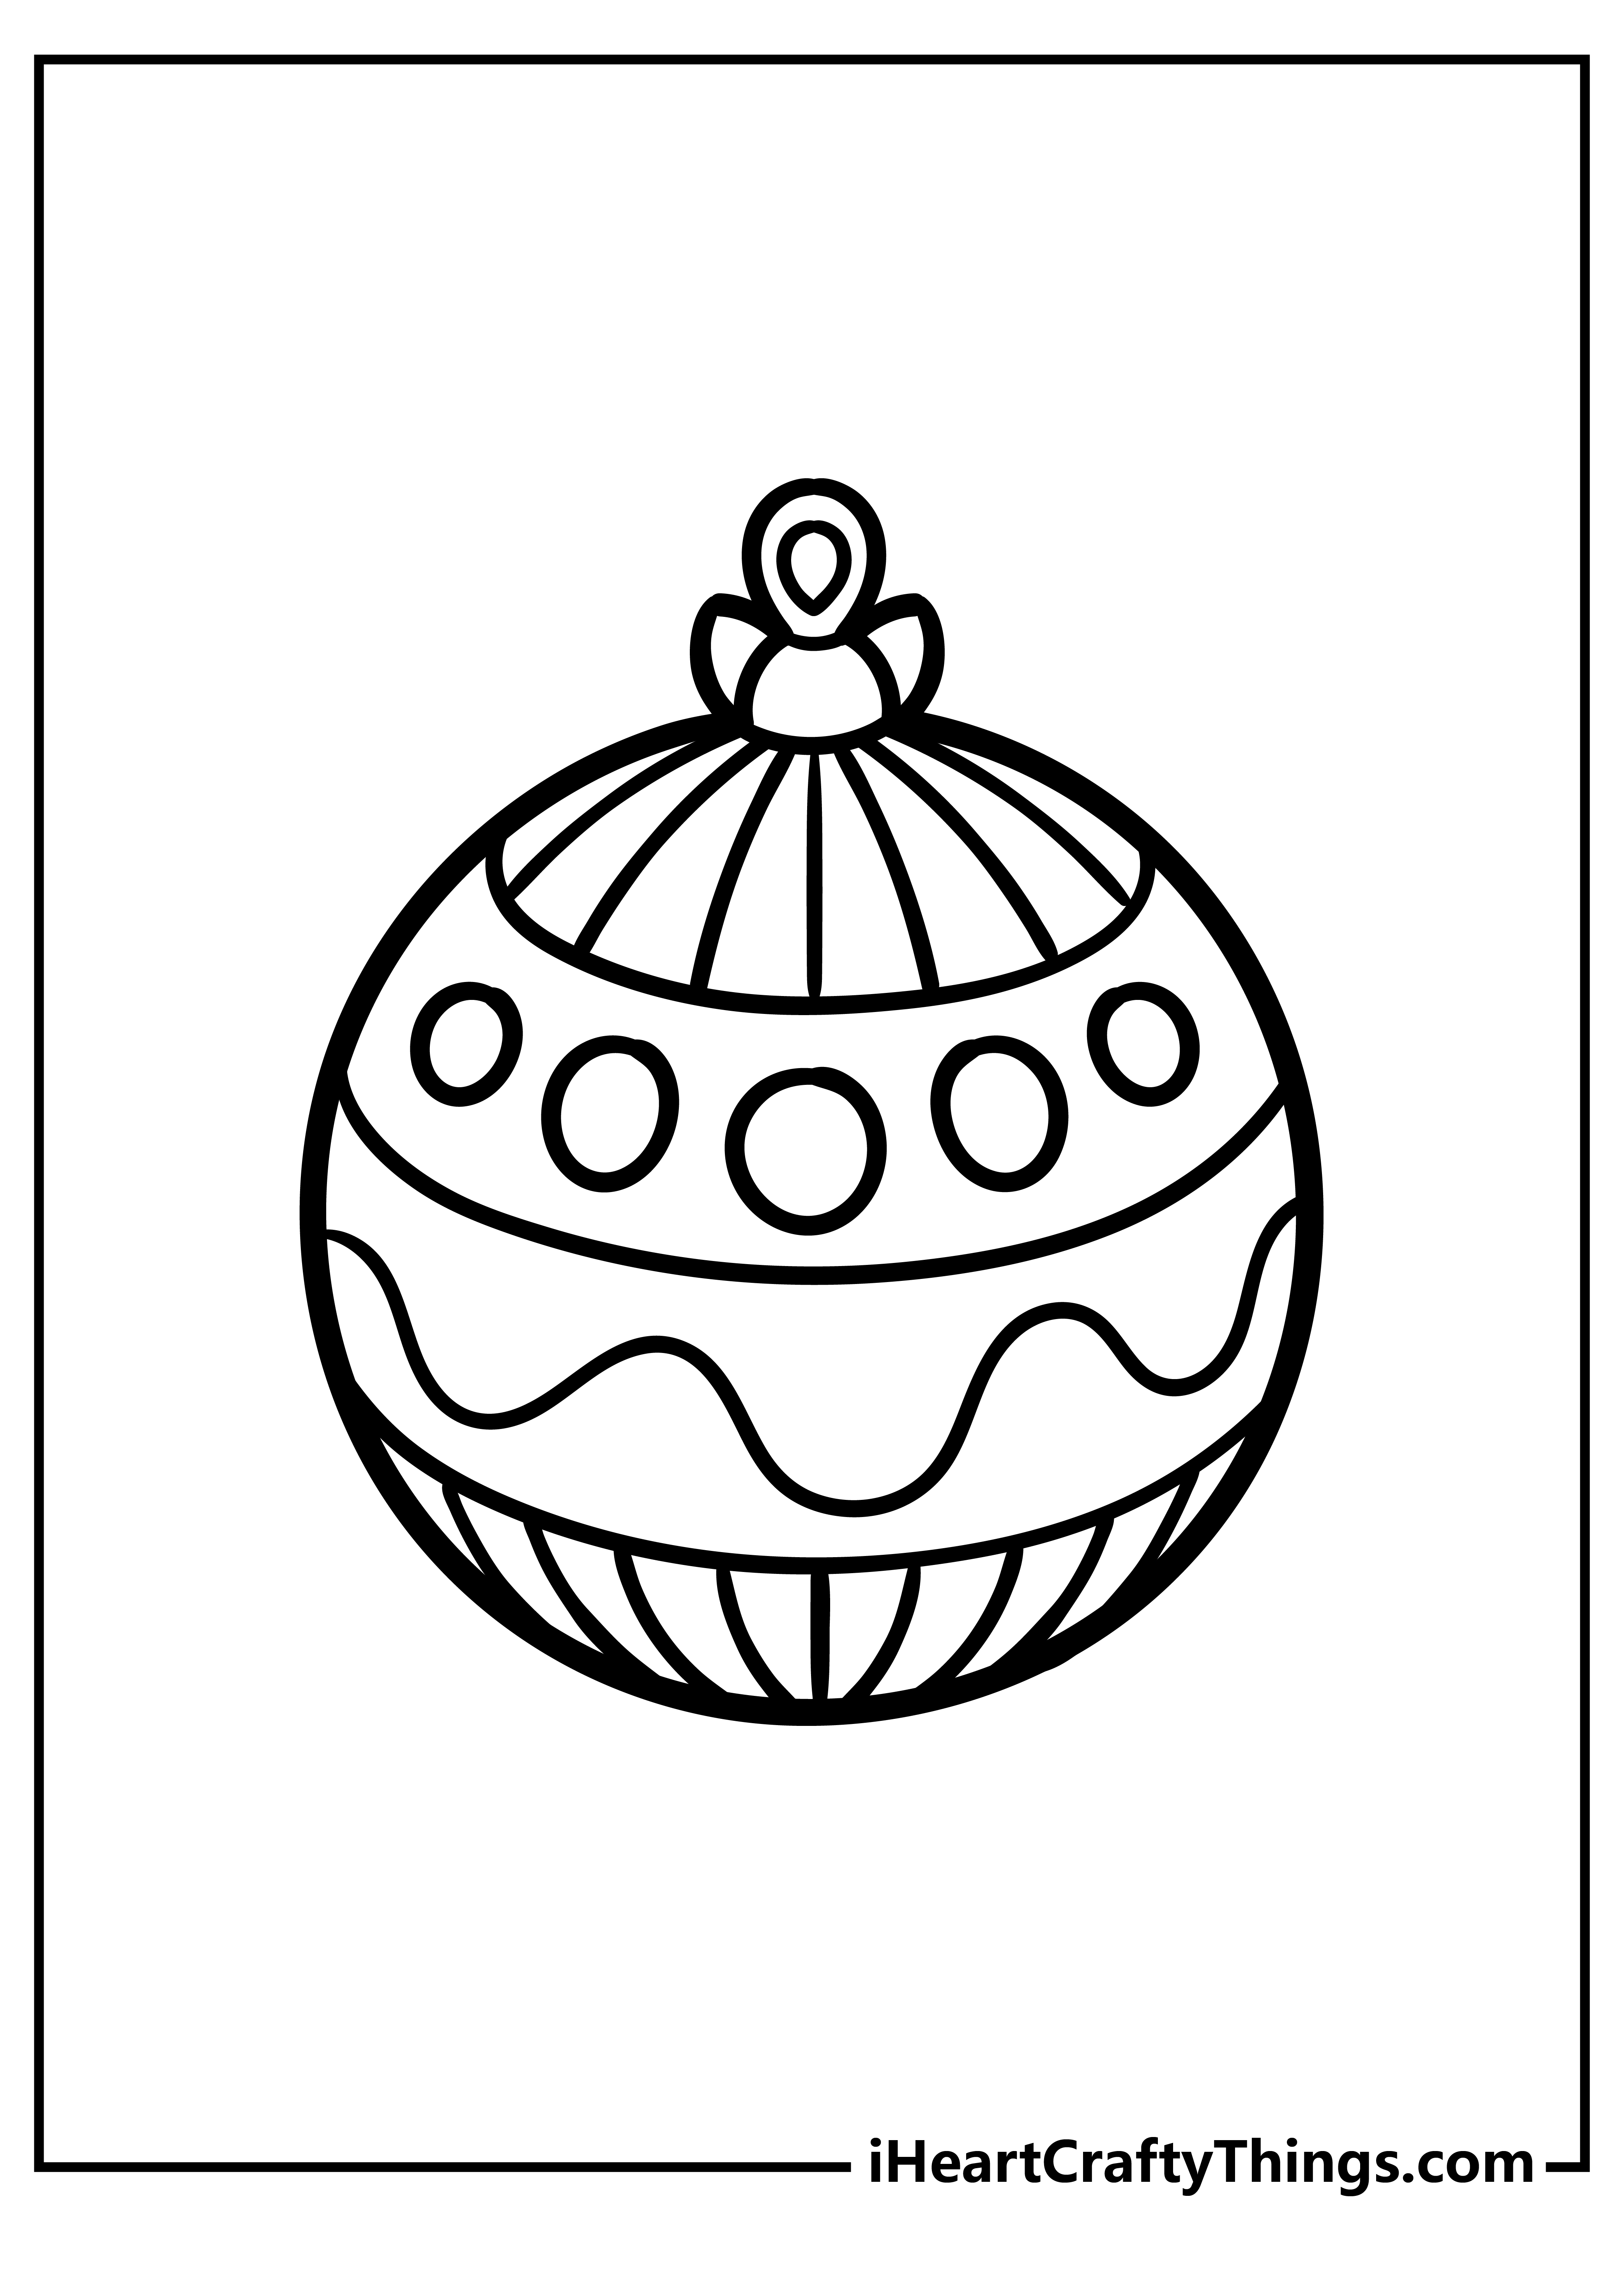 Christmas Ornament Coloring Pages for adults free printable